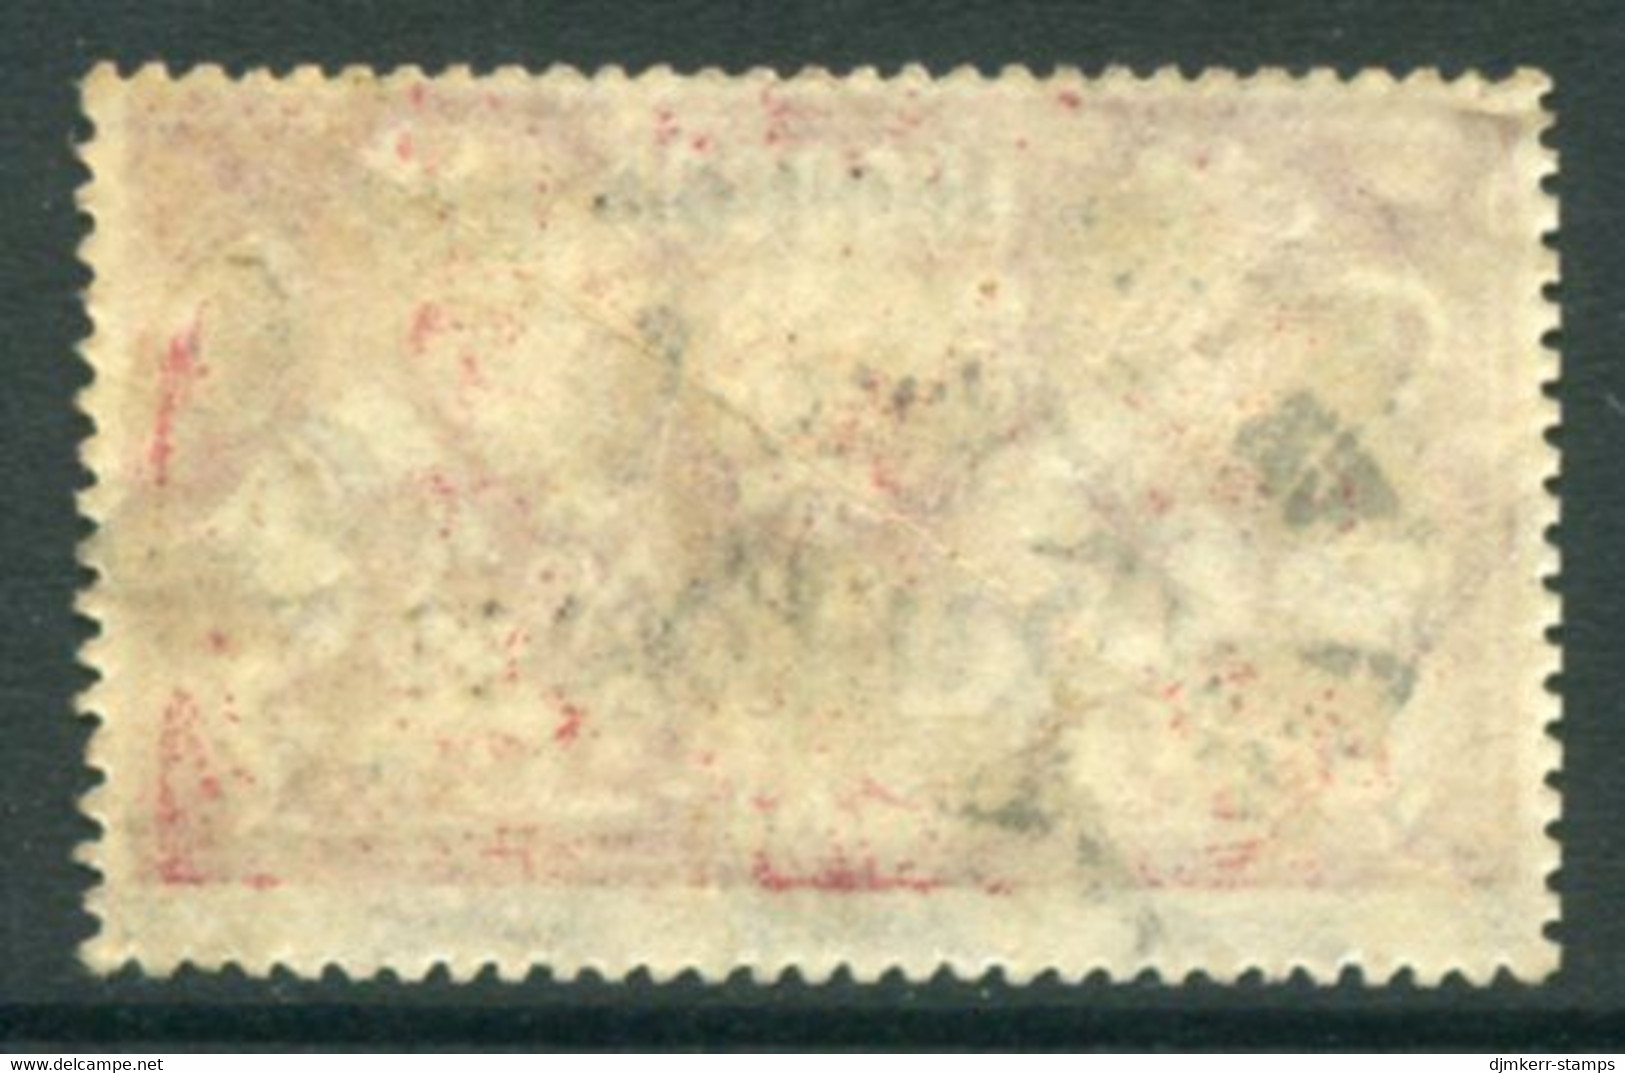 DANZIG 1923 Arms Definitive 5 G. On 1 Mio. Mk. Postally Used With Parcel Cancel.  Michel 192 - Afgestempeld